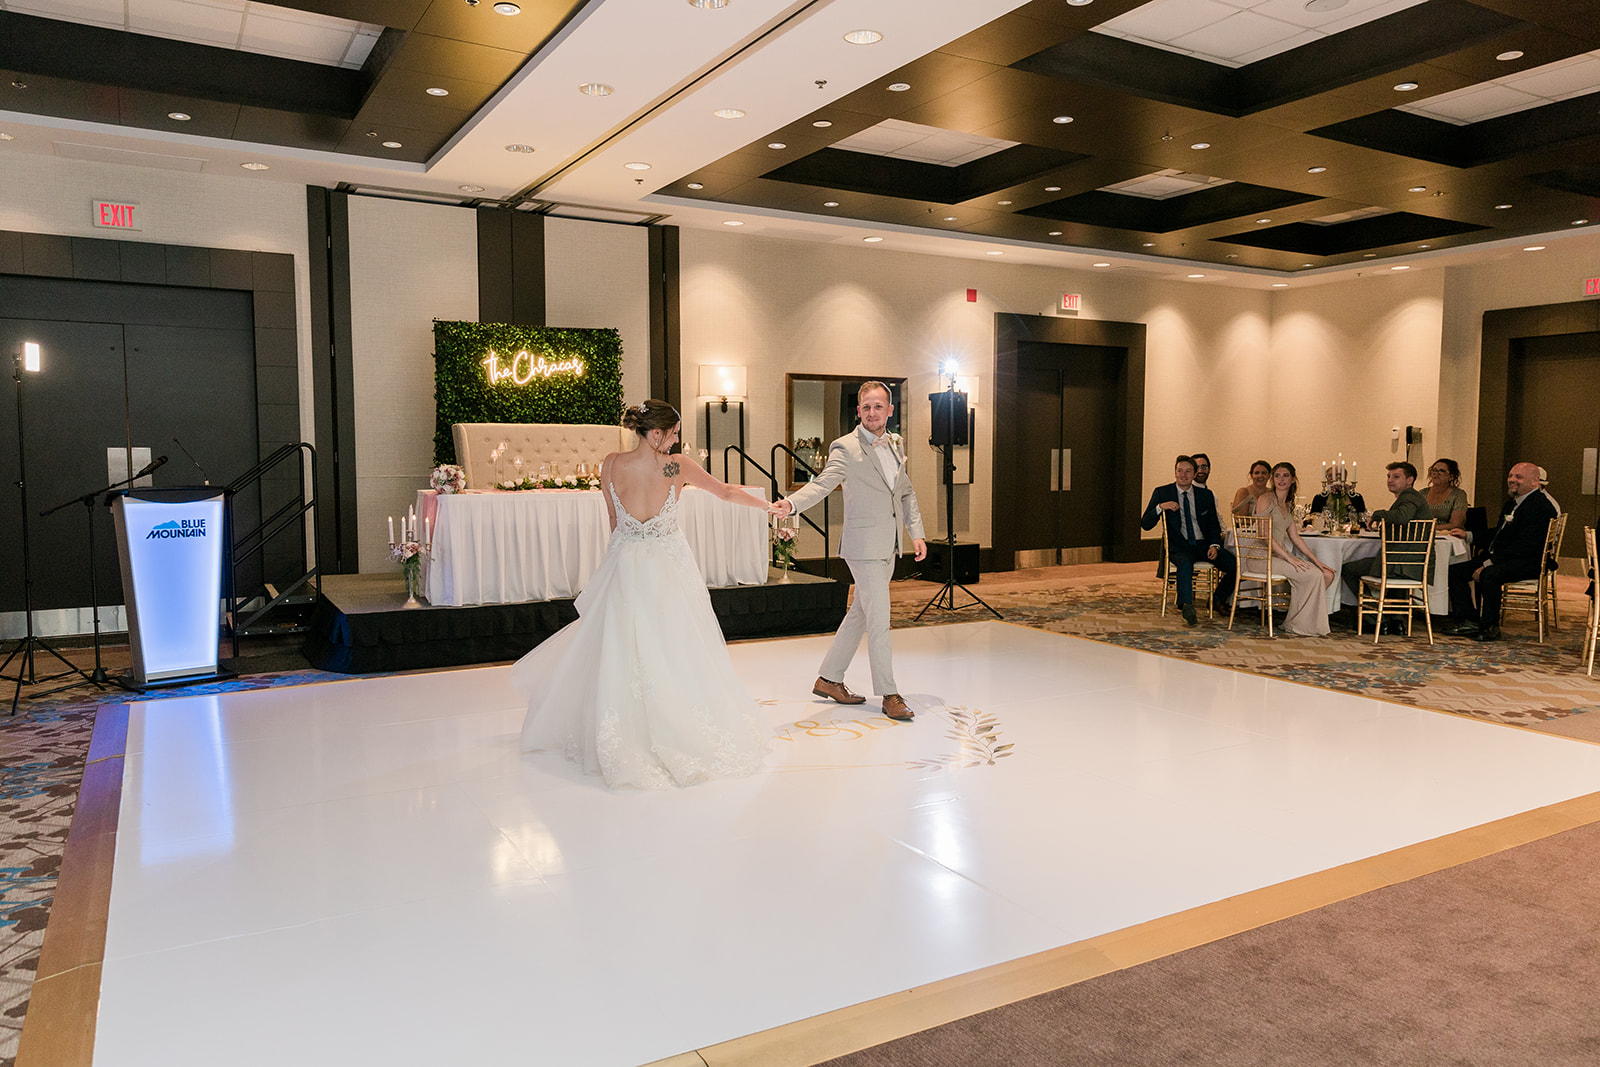 Couple making their grand entrance into their reception